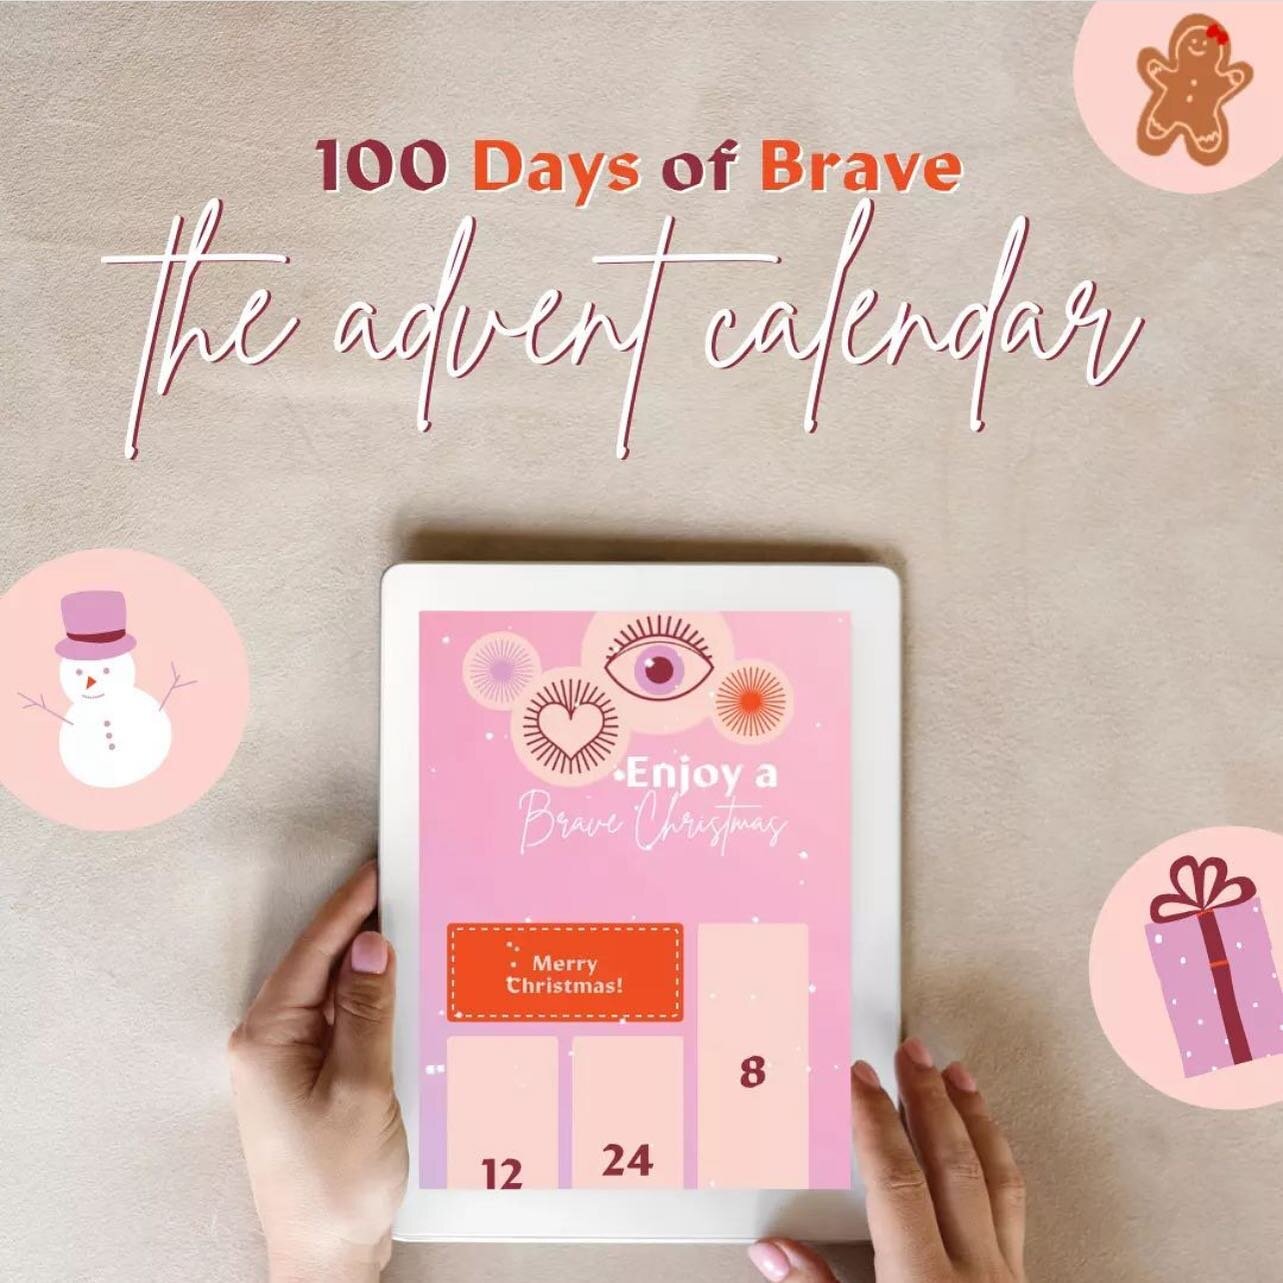 CHEERFUL CALENDAR: The festive season is coming, and we&rsquo;re counting down with an equally cheerful @100daysofbrave Advent calendar! Free and fun, this calendar is filled with Brave goodies, start-up smarts and business brilliance to help you ref